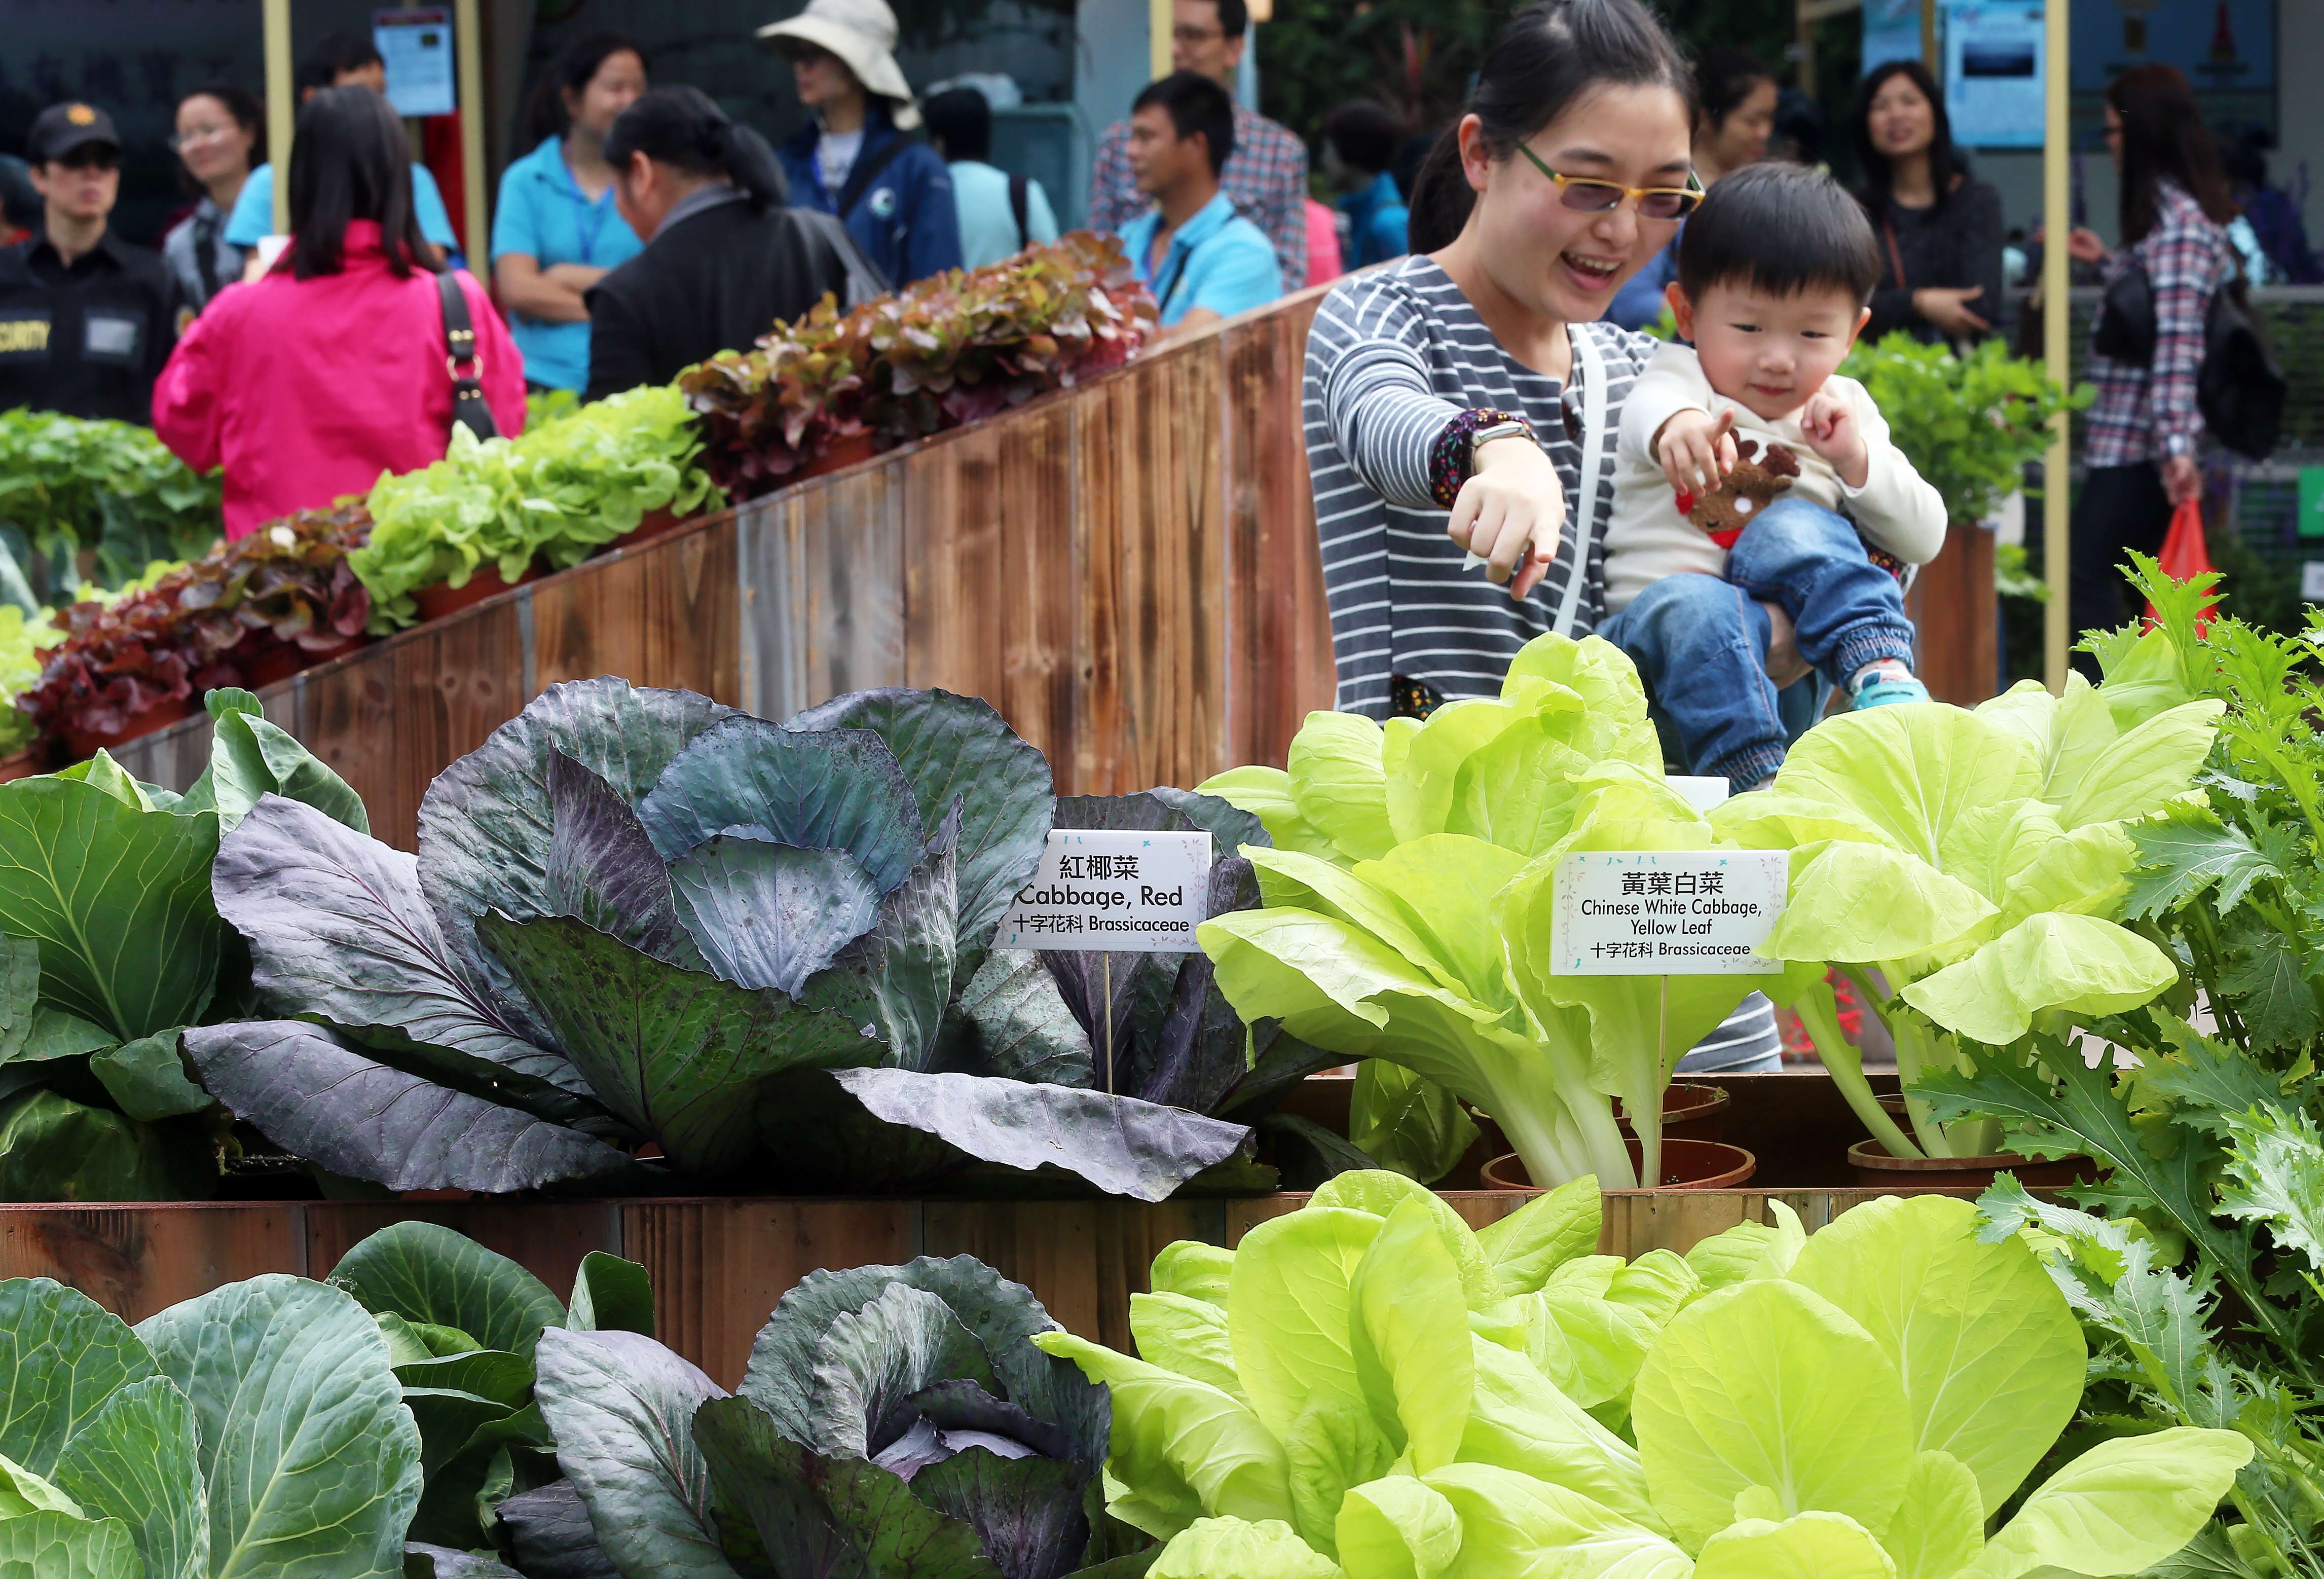 Families enjoy the opening day of Farmfest 2016 at Fa Hui Park in Mong Kok, on January 7 last year. The city’s largest outdoor farmers’ market is organised by the Agriculture, Fisheries and Conservation Department and aims to promote these sectors. Photo: K. Y. Cheng